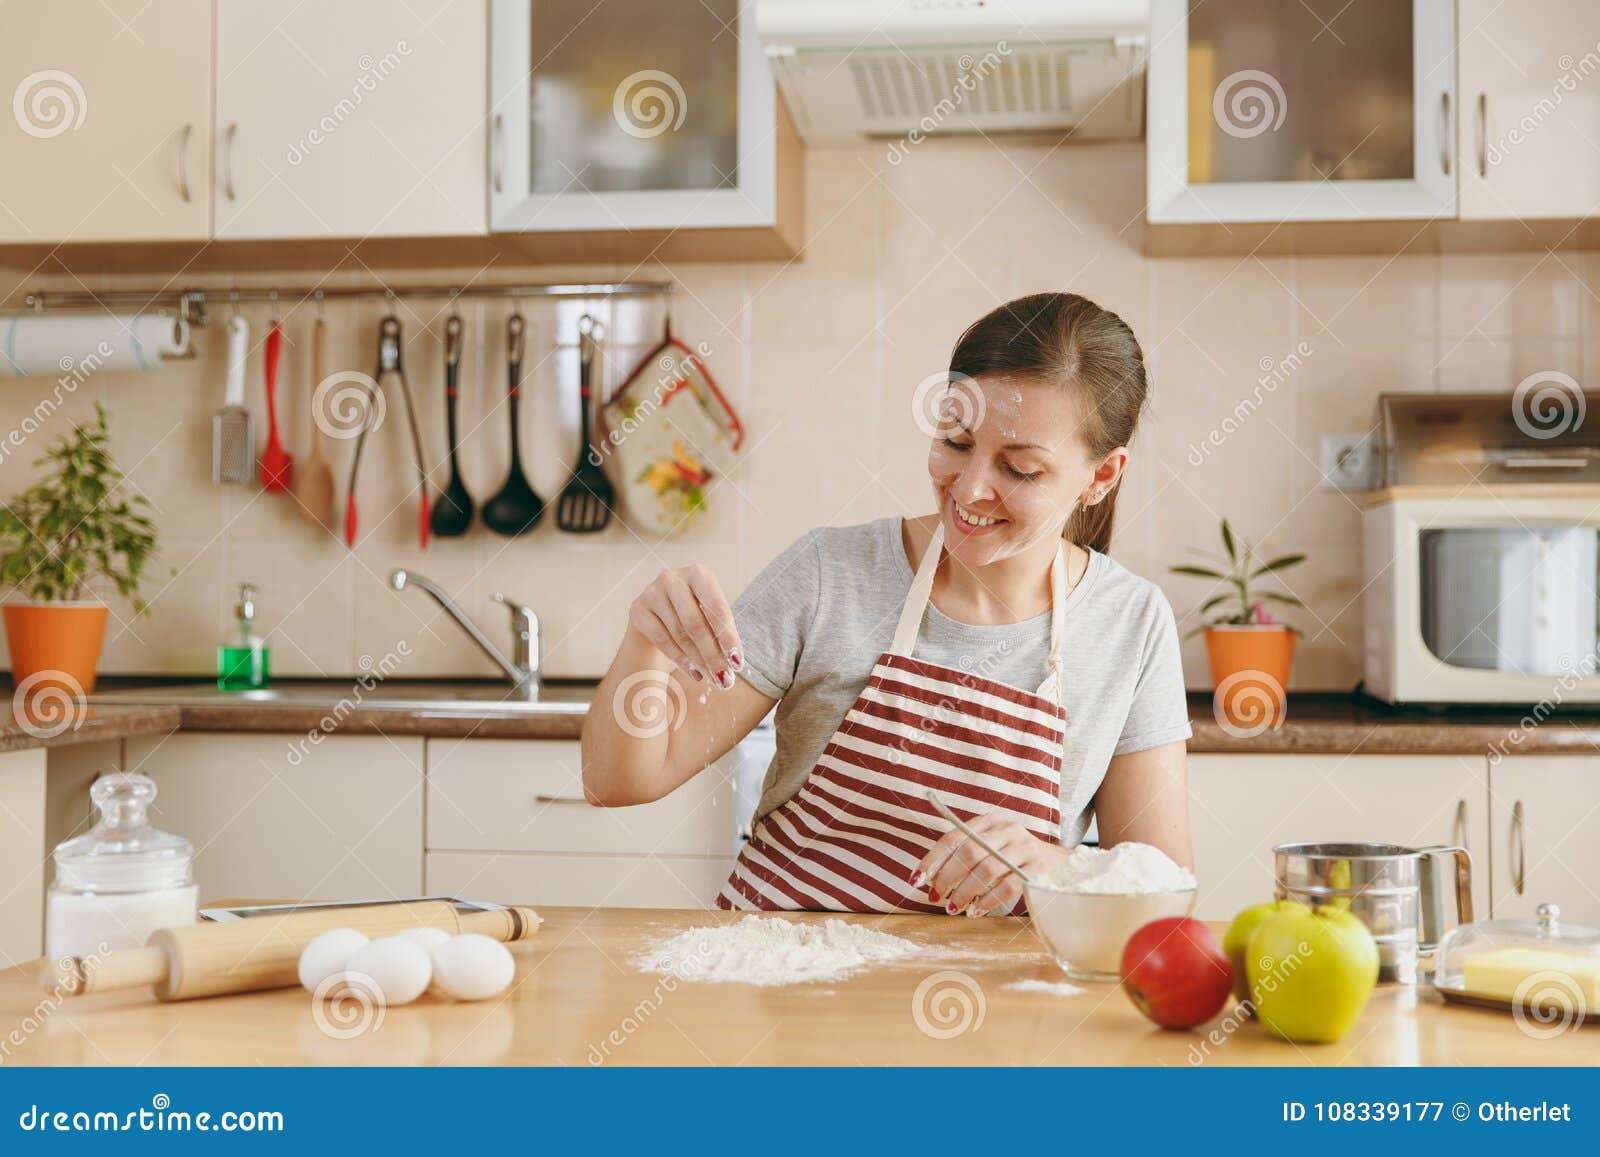 Young Beautiful Woman Is Cooking In The Kitchen Stock Image Image Of